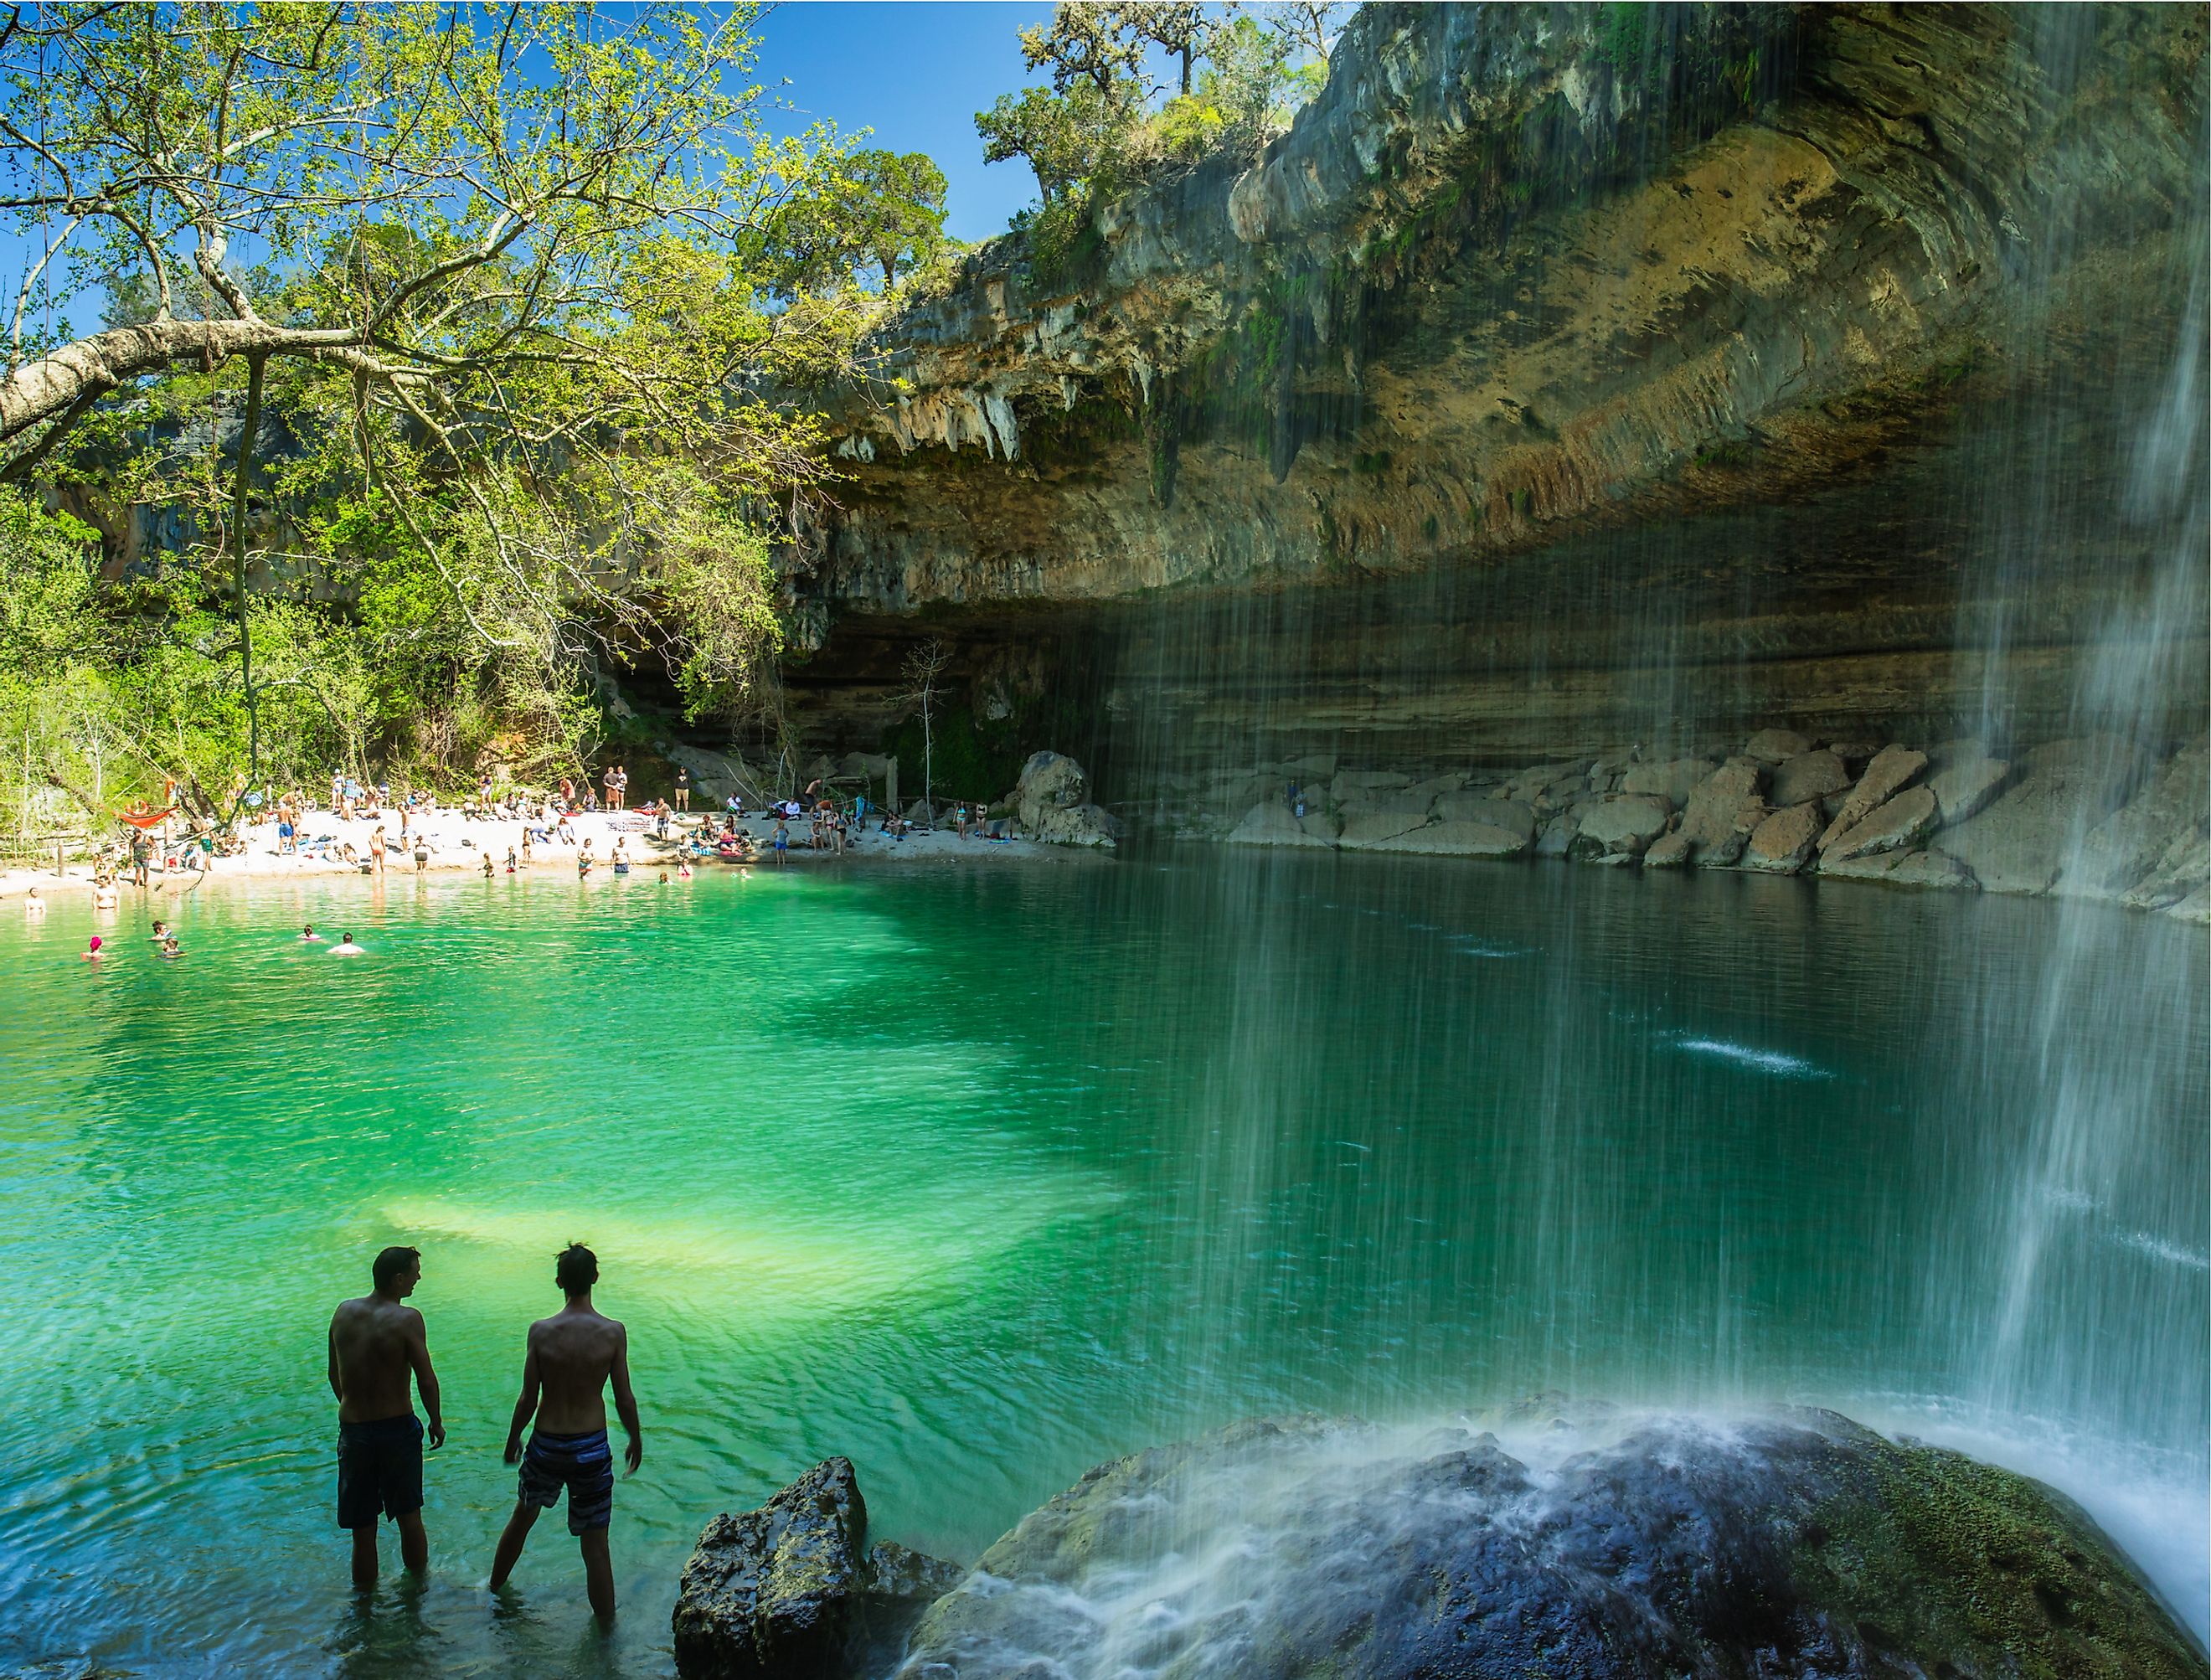 The natural Hamilton Pool is a popular tourist destination in rural Travis County.